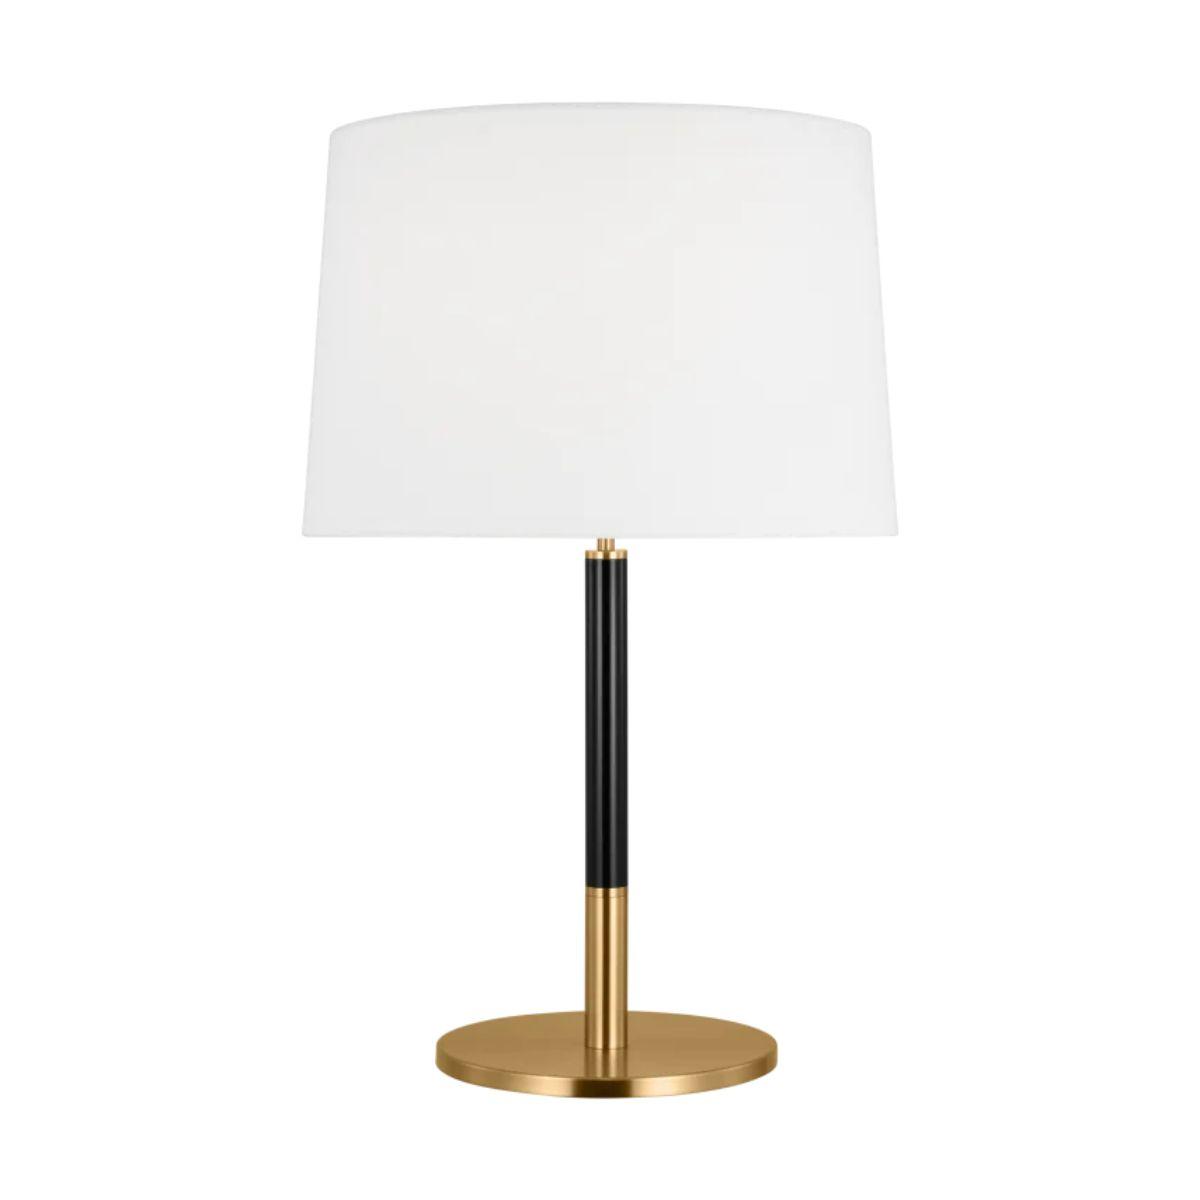 Monroe Medium Table Lamp Burnished Brass with Black Accents - Bees Lighting